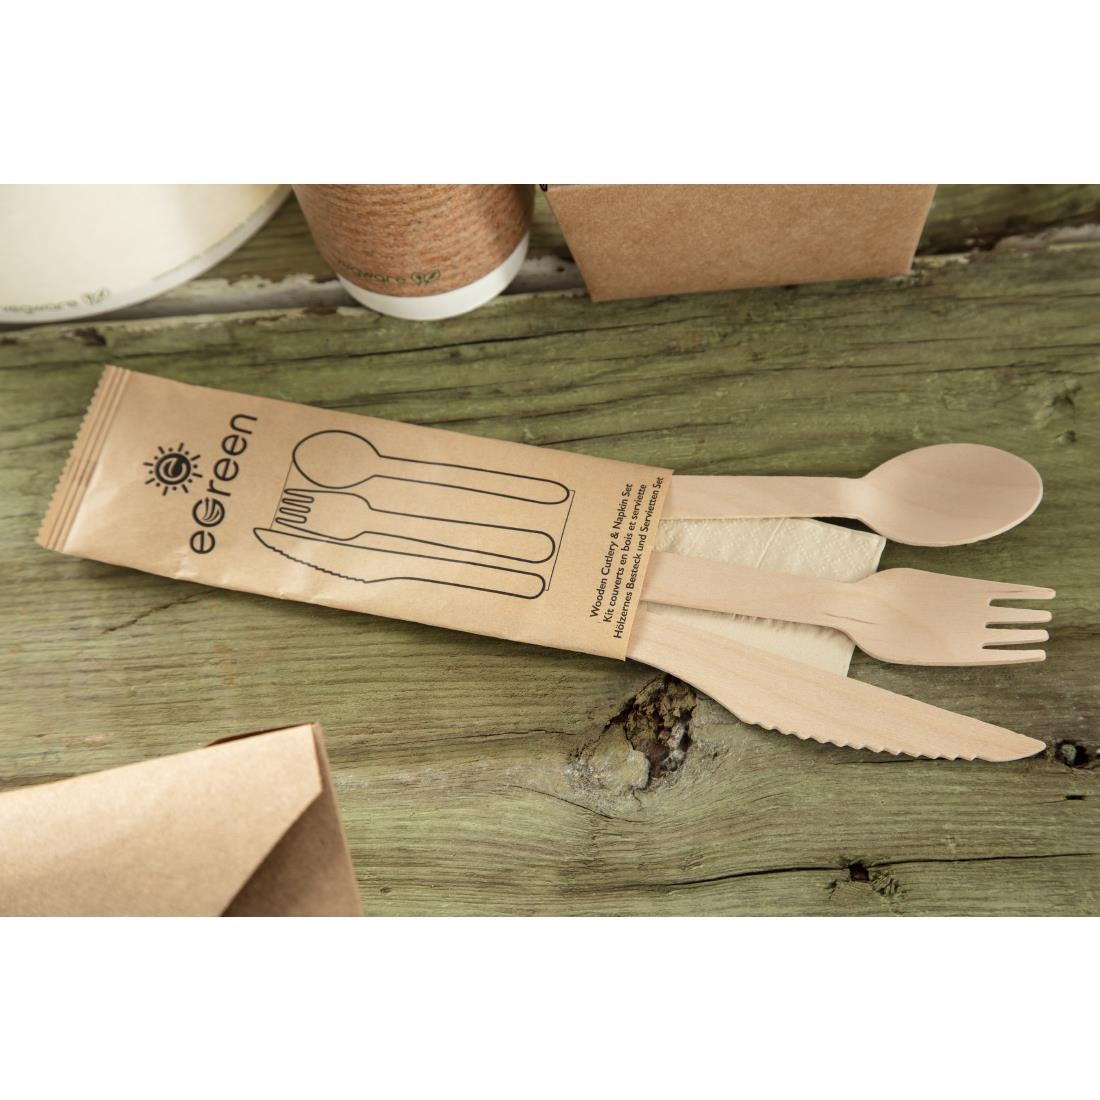 FS168 eGreen Individually Kraft Wrapped 4-in-1 Wooden Cutlery Set (Pack of 250) JD Catering Equipment Solutions Ltd